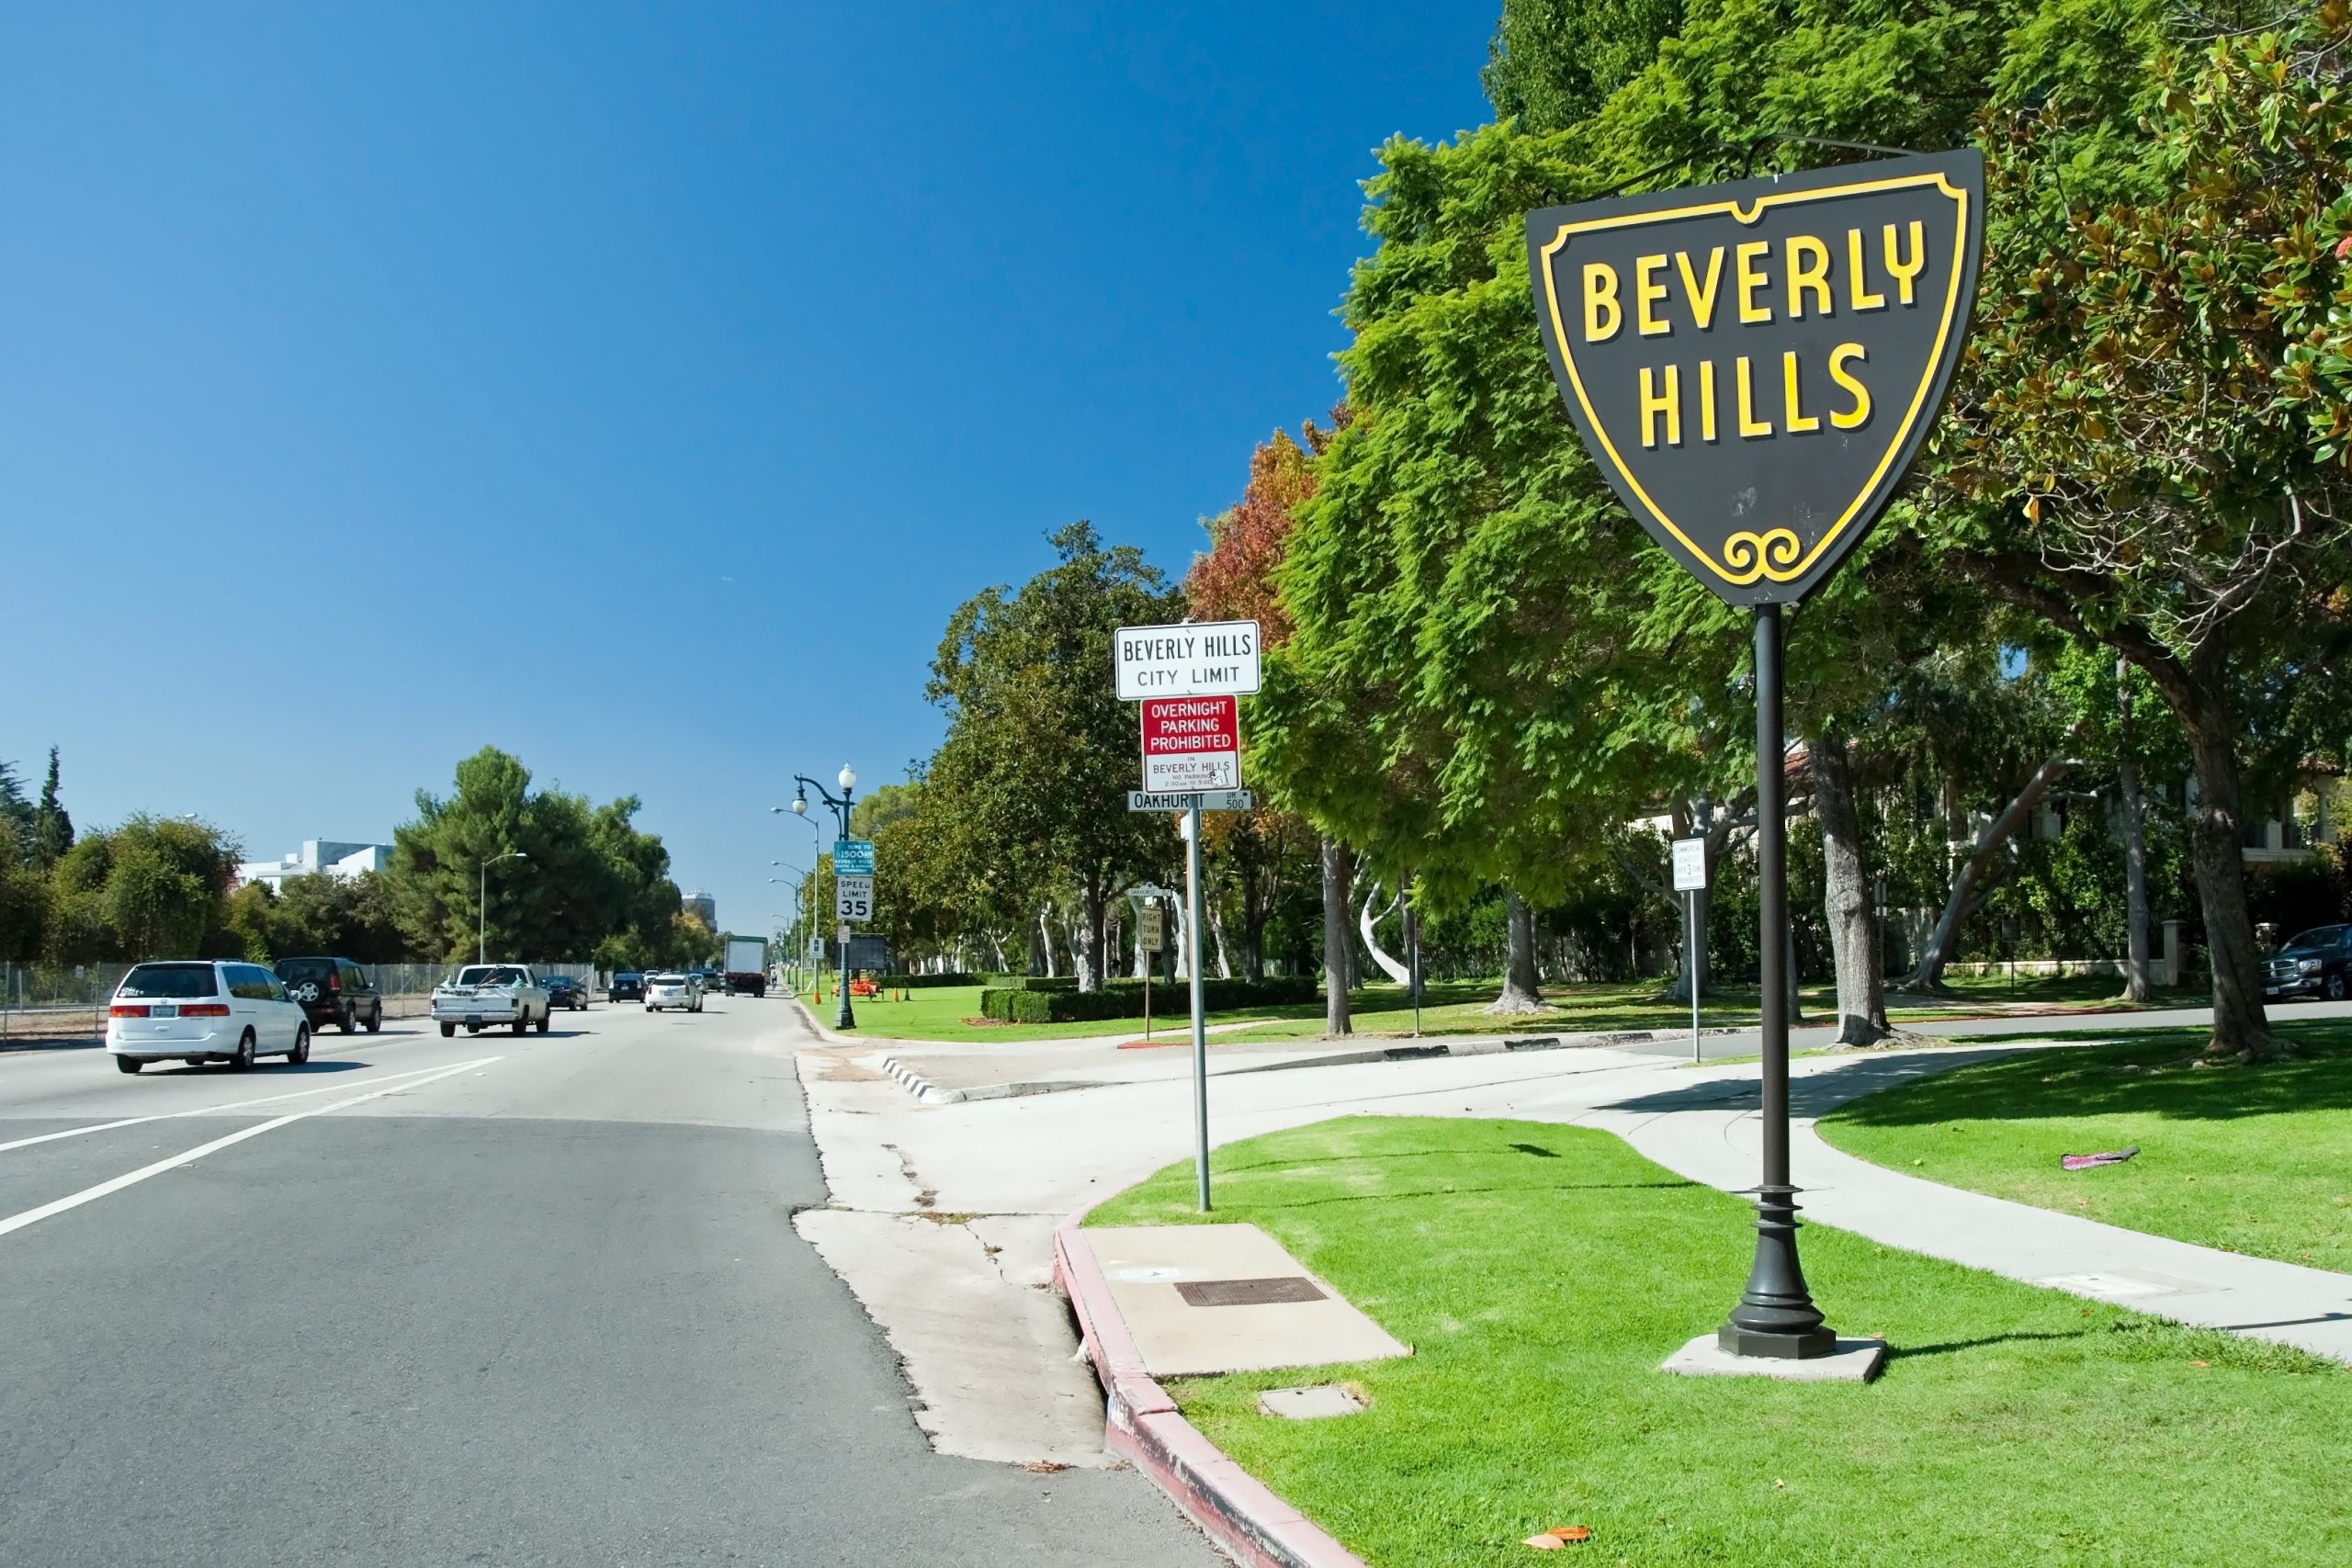 Beverly,Hills,Sign,In,Los,Angeles,Park,With,Beautiful,Blue